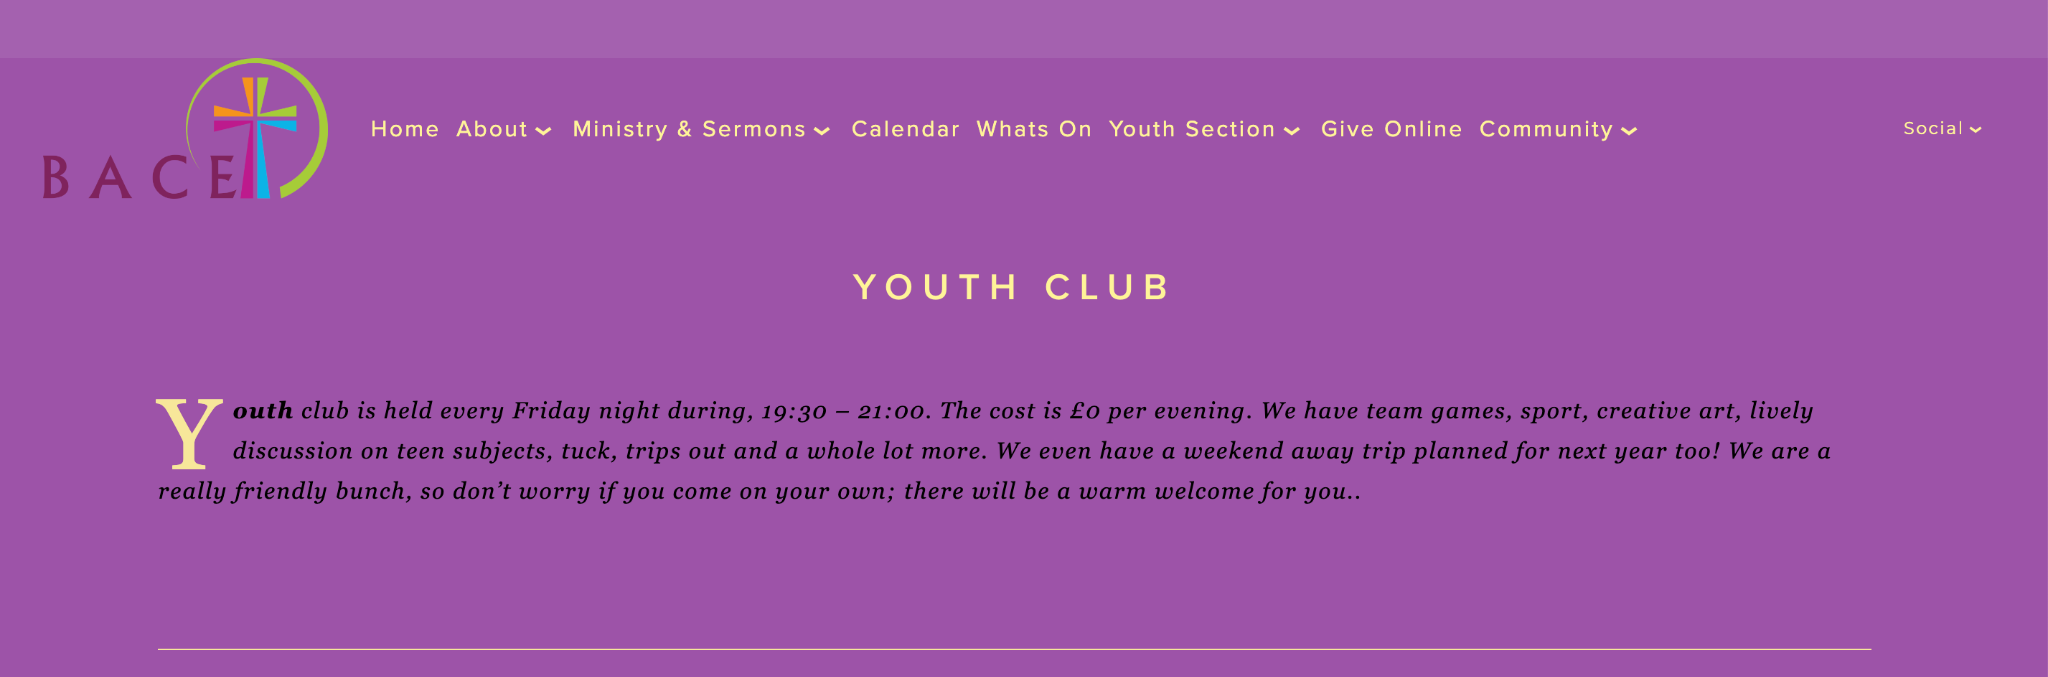 B.A.C.E.'s website showing their youth ministry information. 